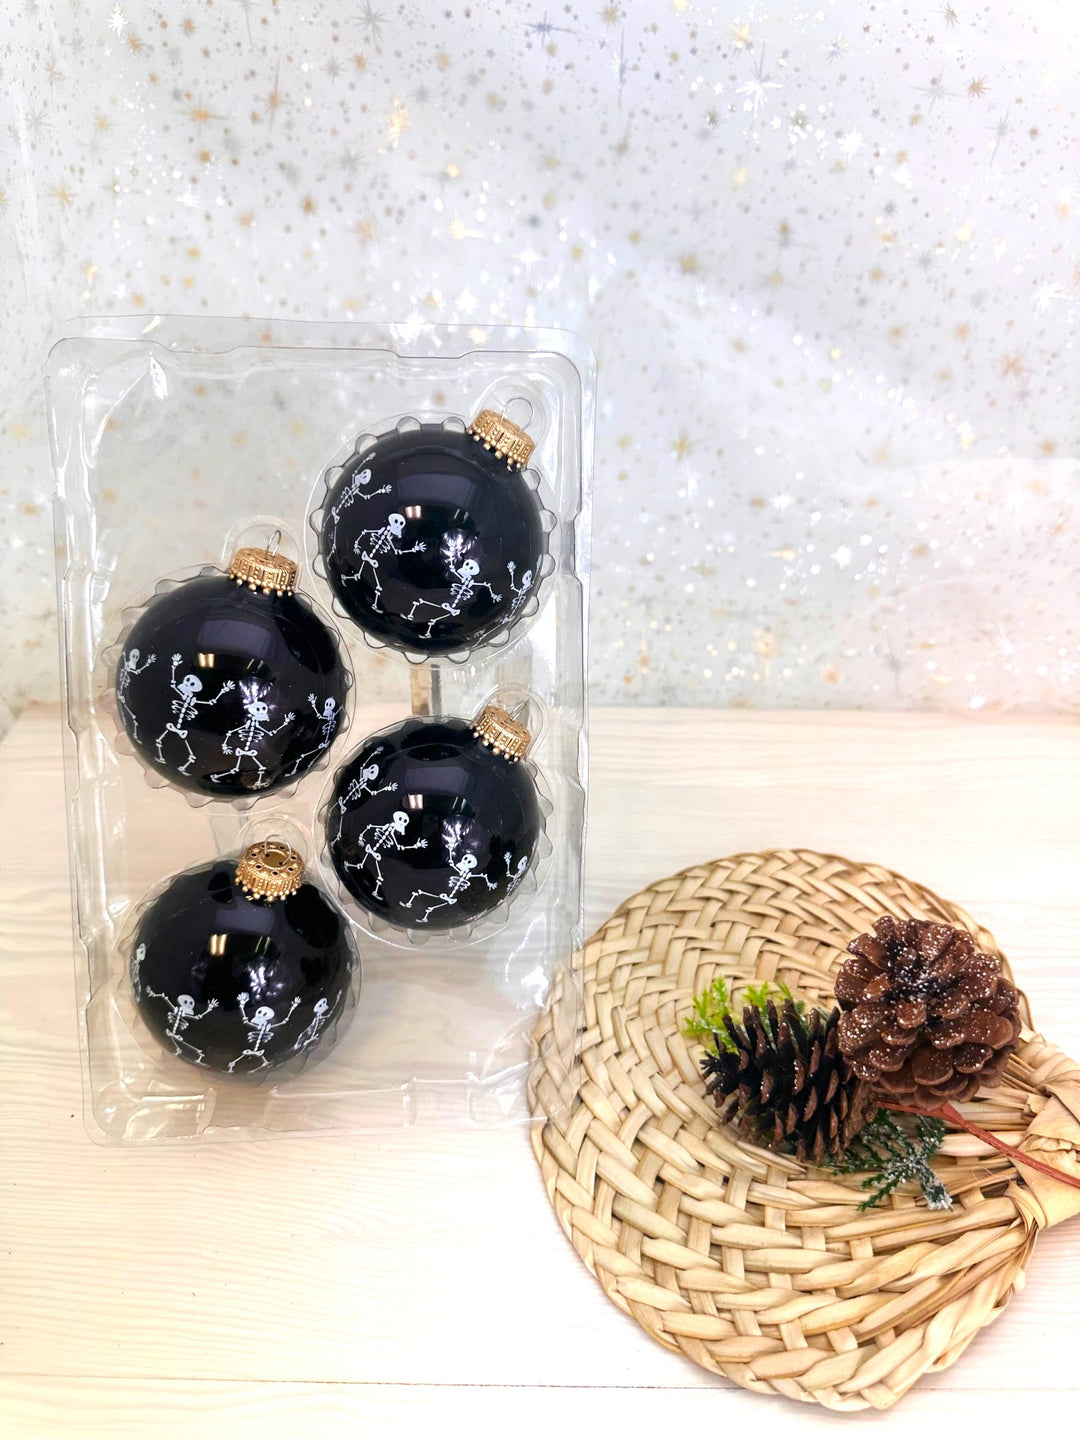 Halloween Tree Ornaments - 67mm/2.625" Decorated Glass Balls from Christmas by Krebs - Handmade Seamless Hanging Holiday Decorations for Trees - Set of 4 (Shiny Ebony Black with Dancing Skeletons)